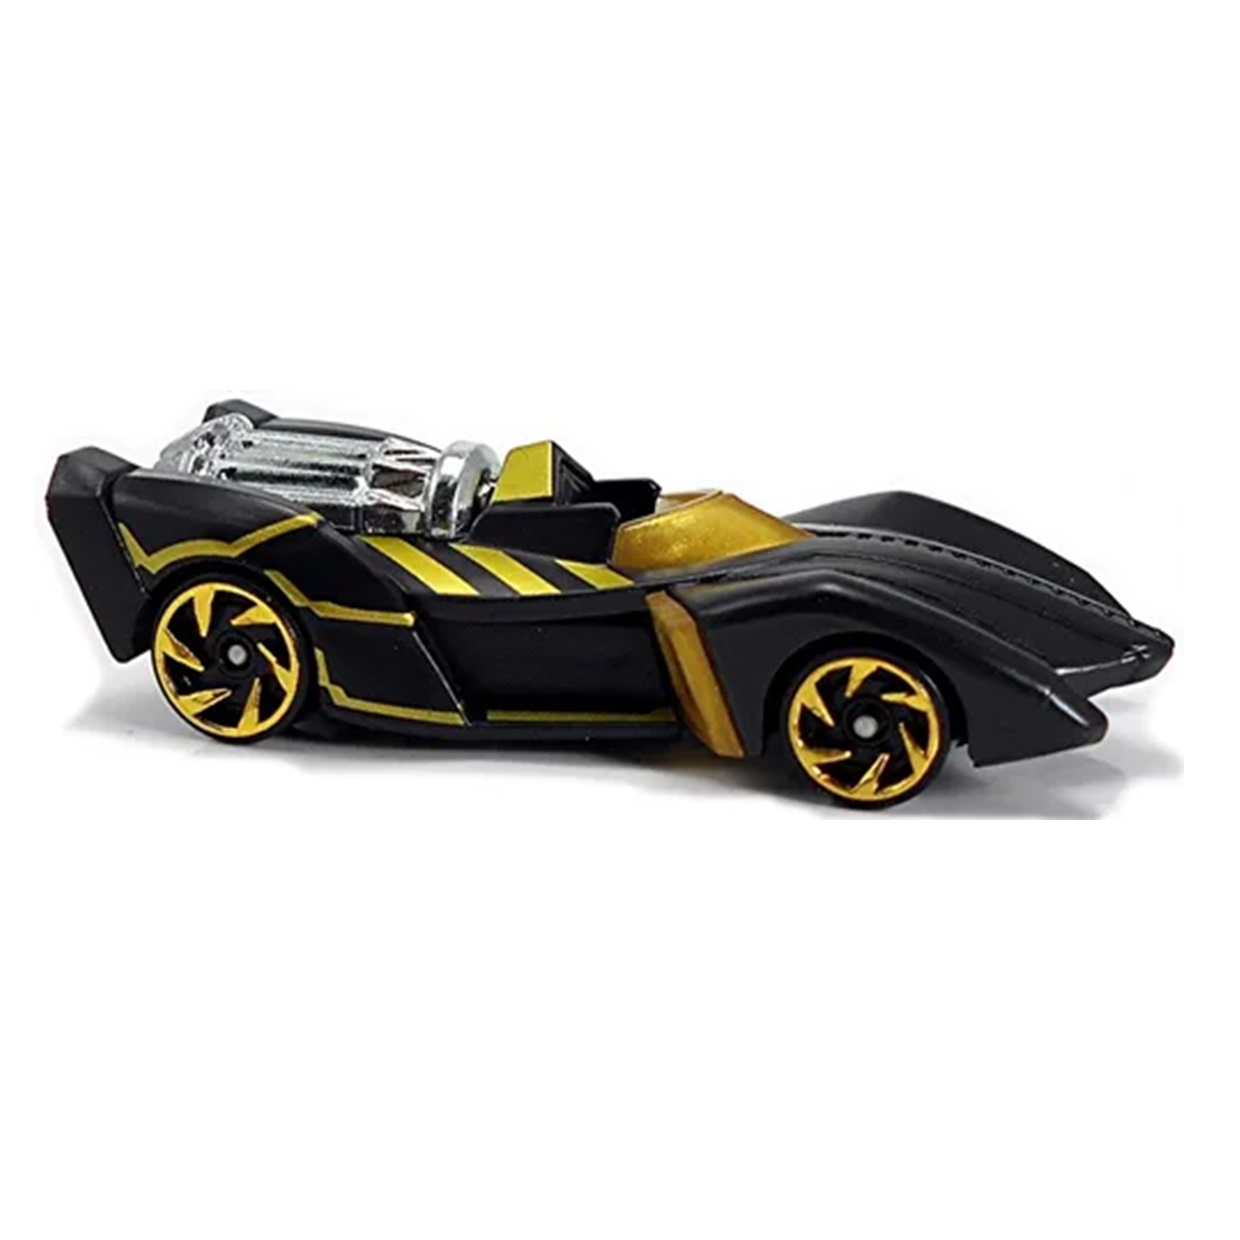 Ronin Avengers Hot Wheels Character Cars First Appearance